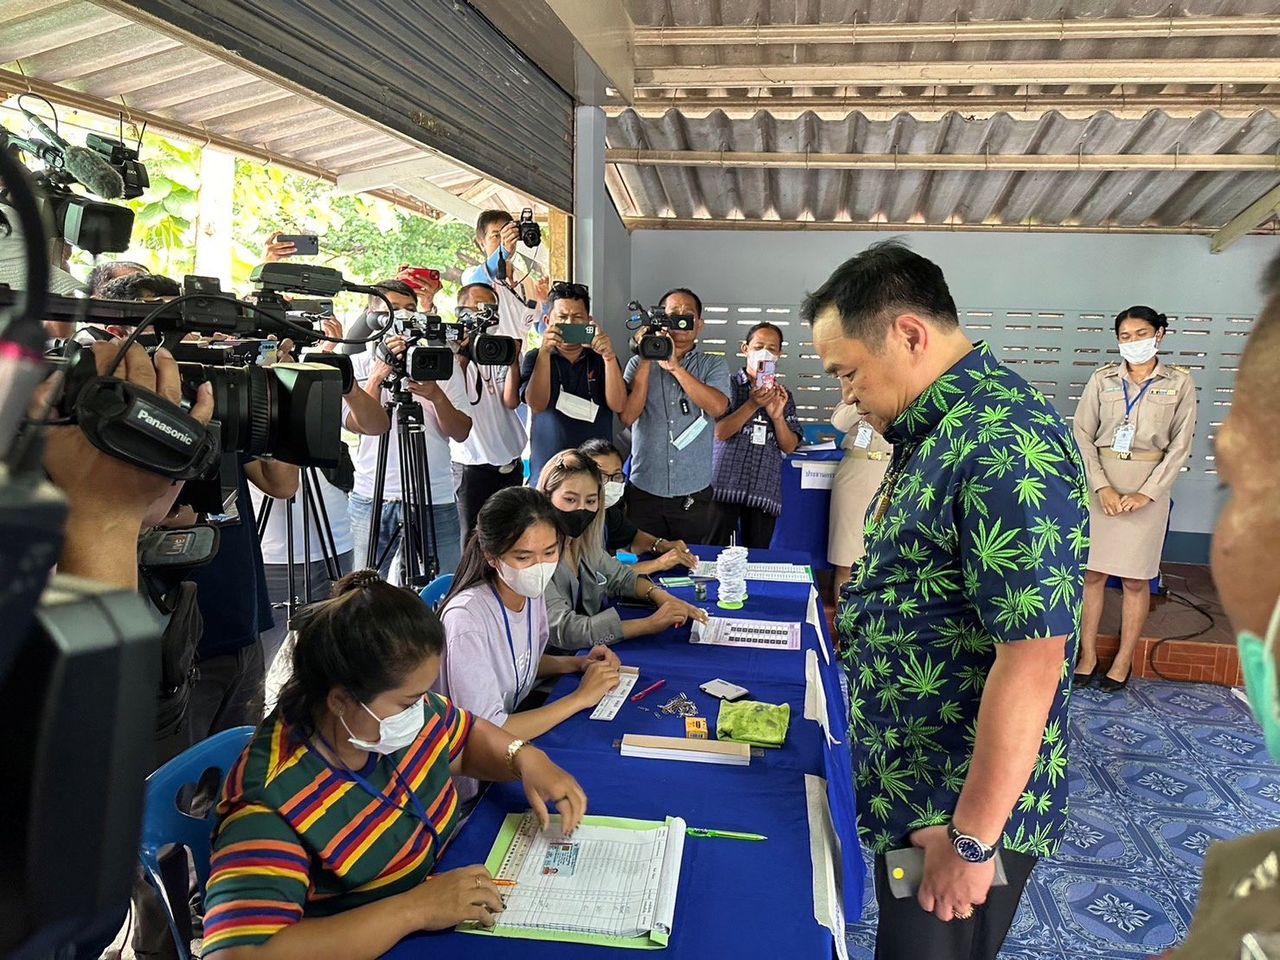 Thailand Prime Minister Candidate Casts Vote In Marijuana-Print Shirt